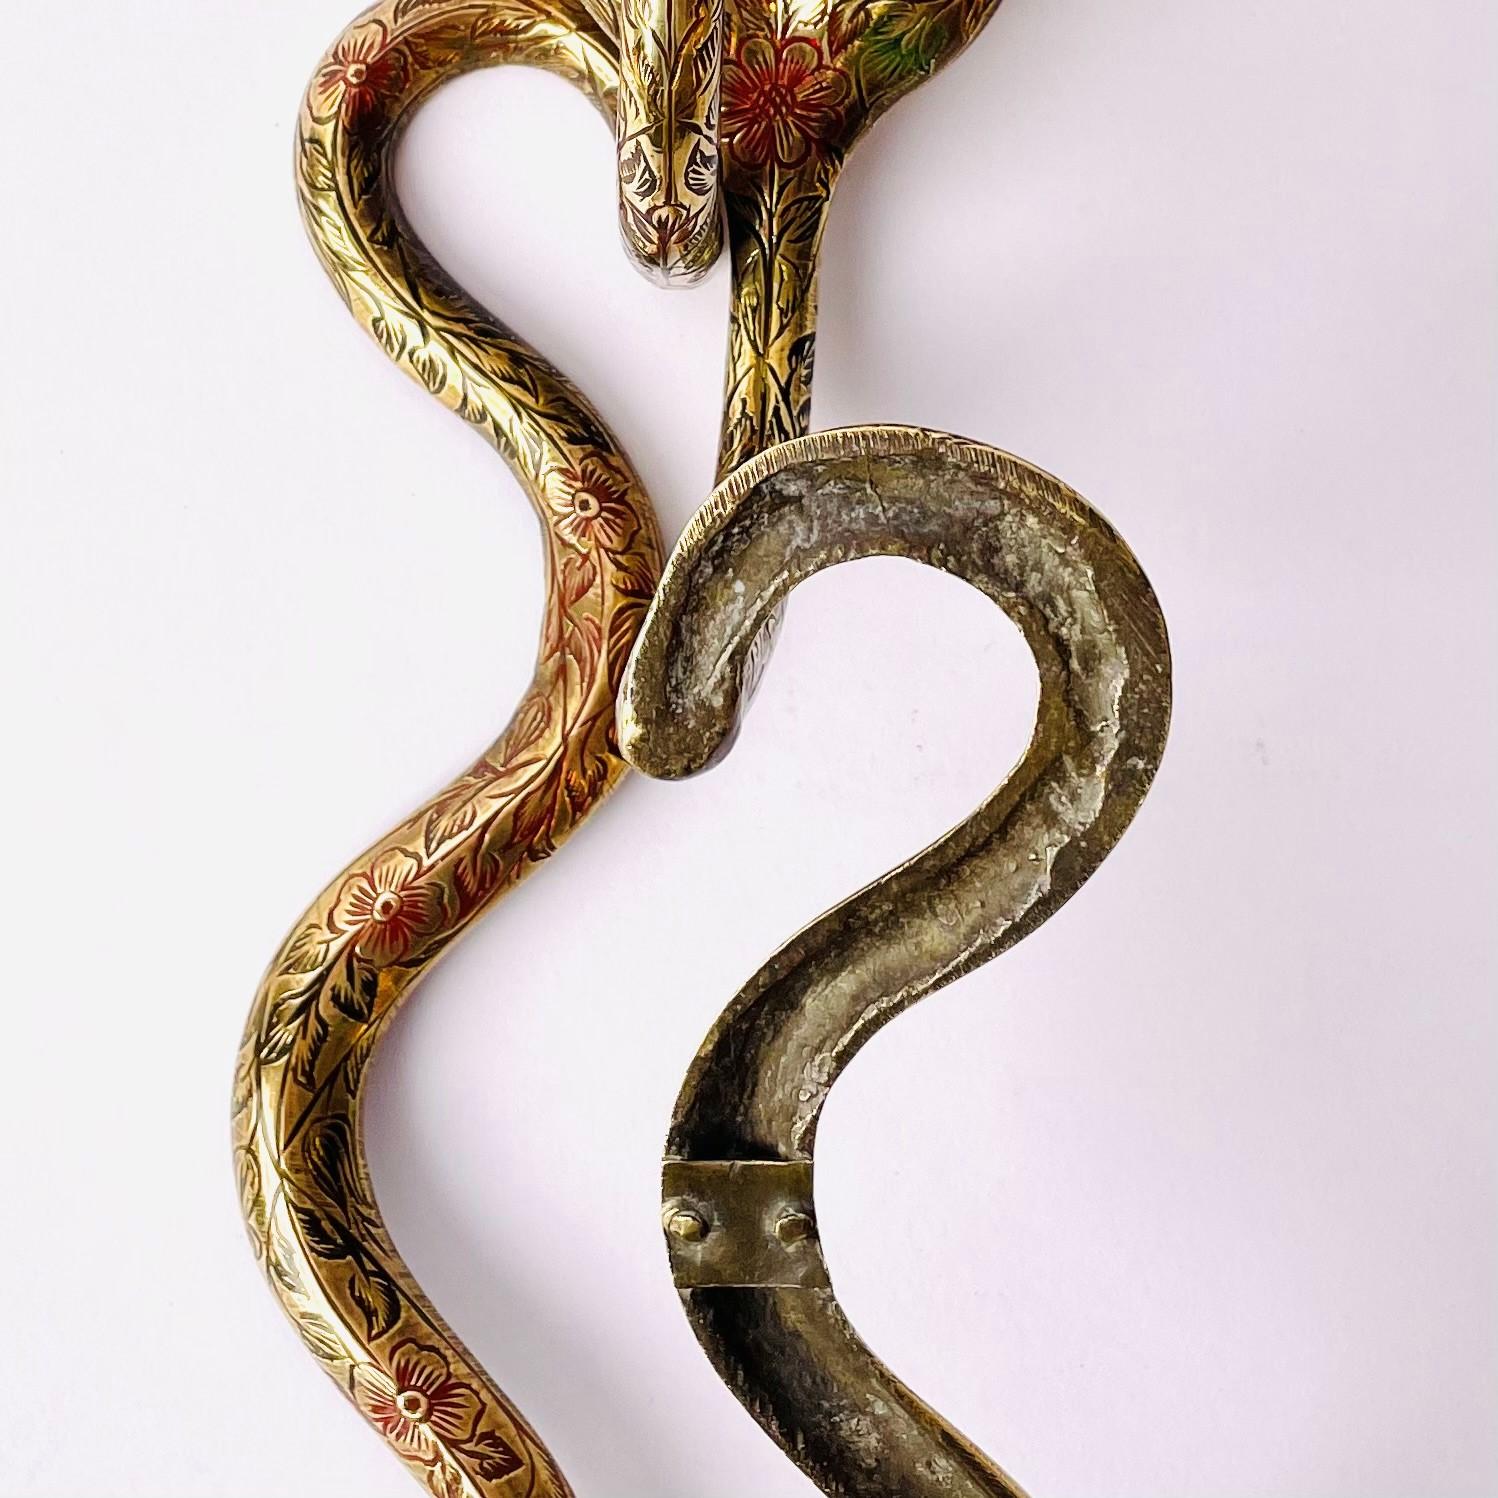 Pair of Wall Lights  in the Shape of a Cobra, Art Deco, 1920s-1930s 1